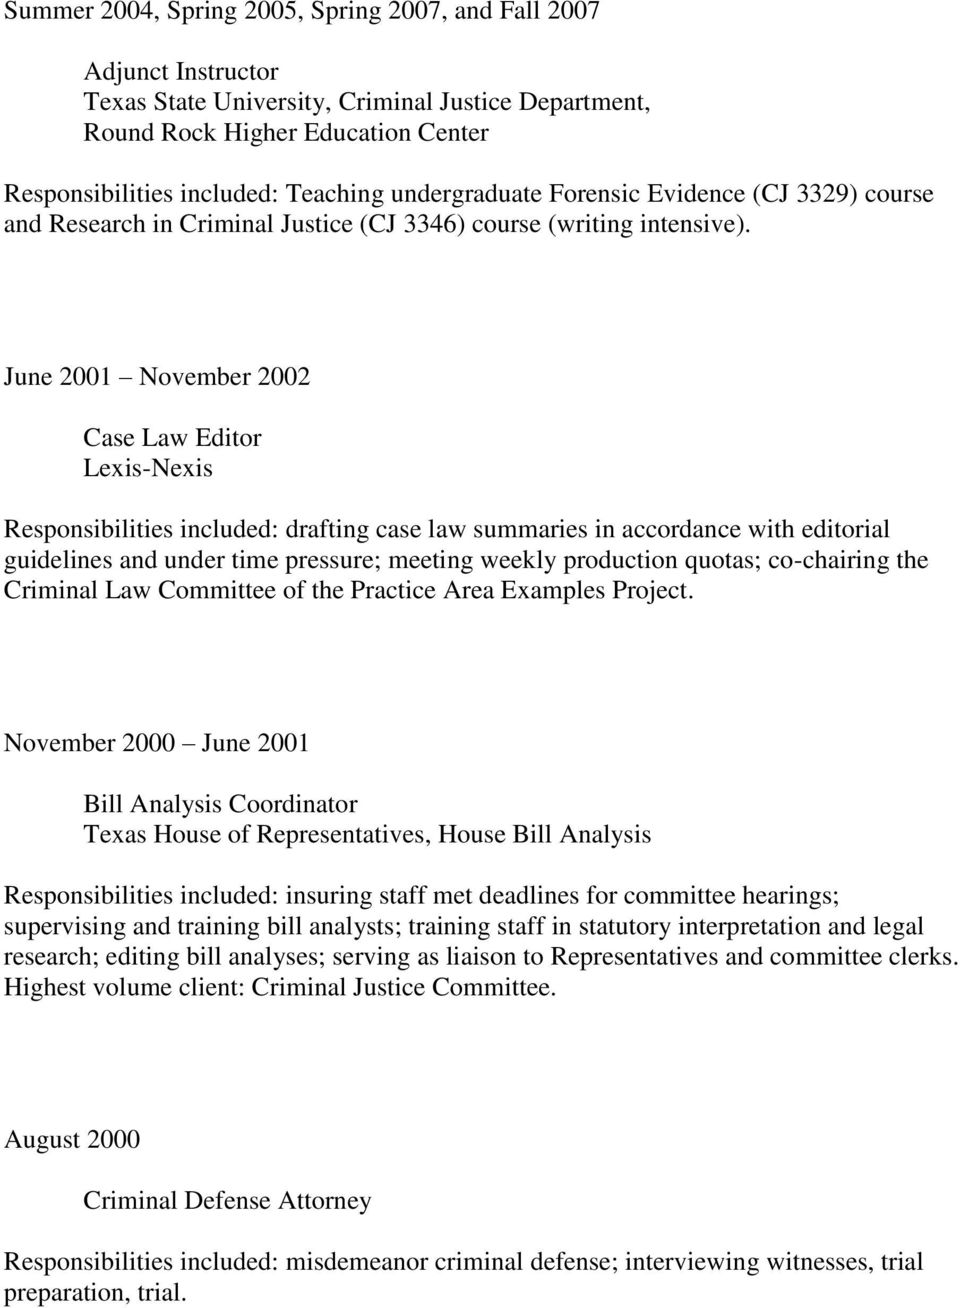 June 2001 November 2002 Case Law Editor Lexis-Nexis Responsibilities included: drafting case law summaries in accordance with editorial guidelines and under time pressure; meeting weekly production